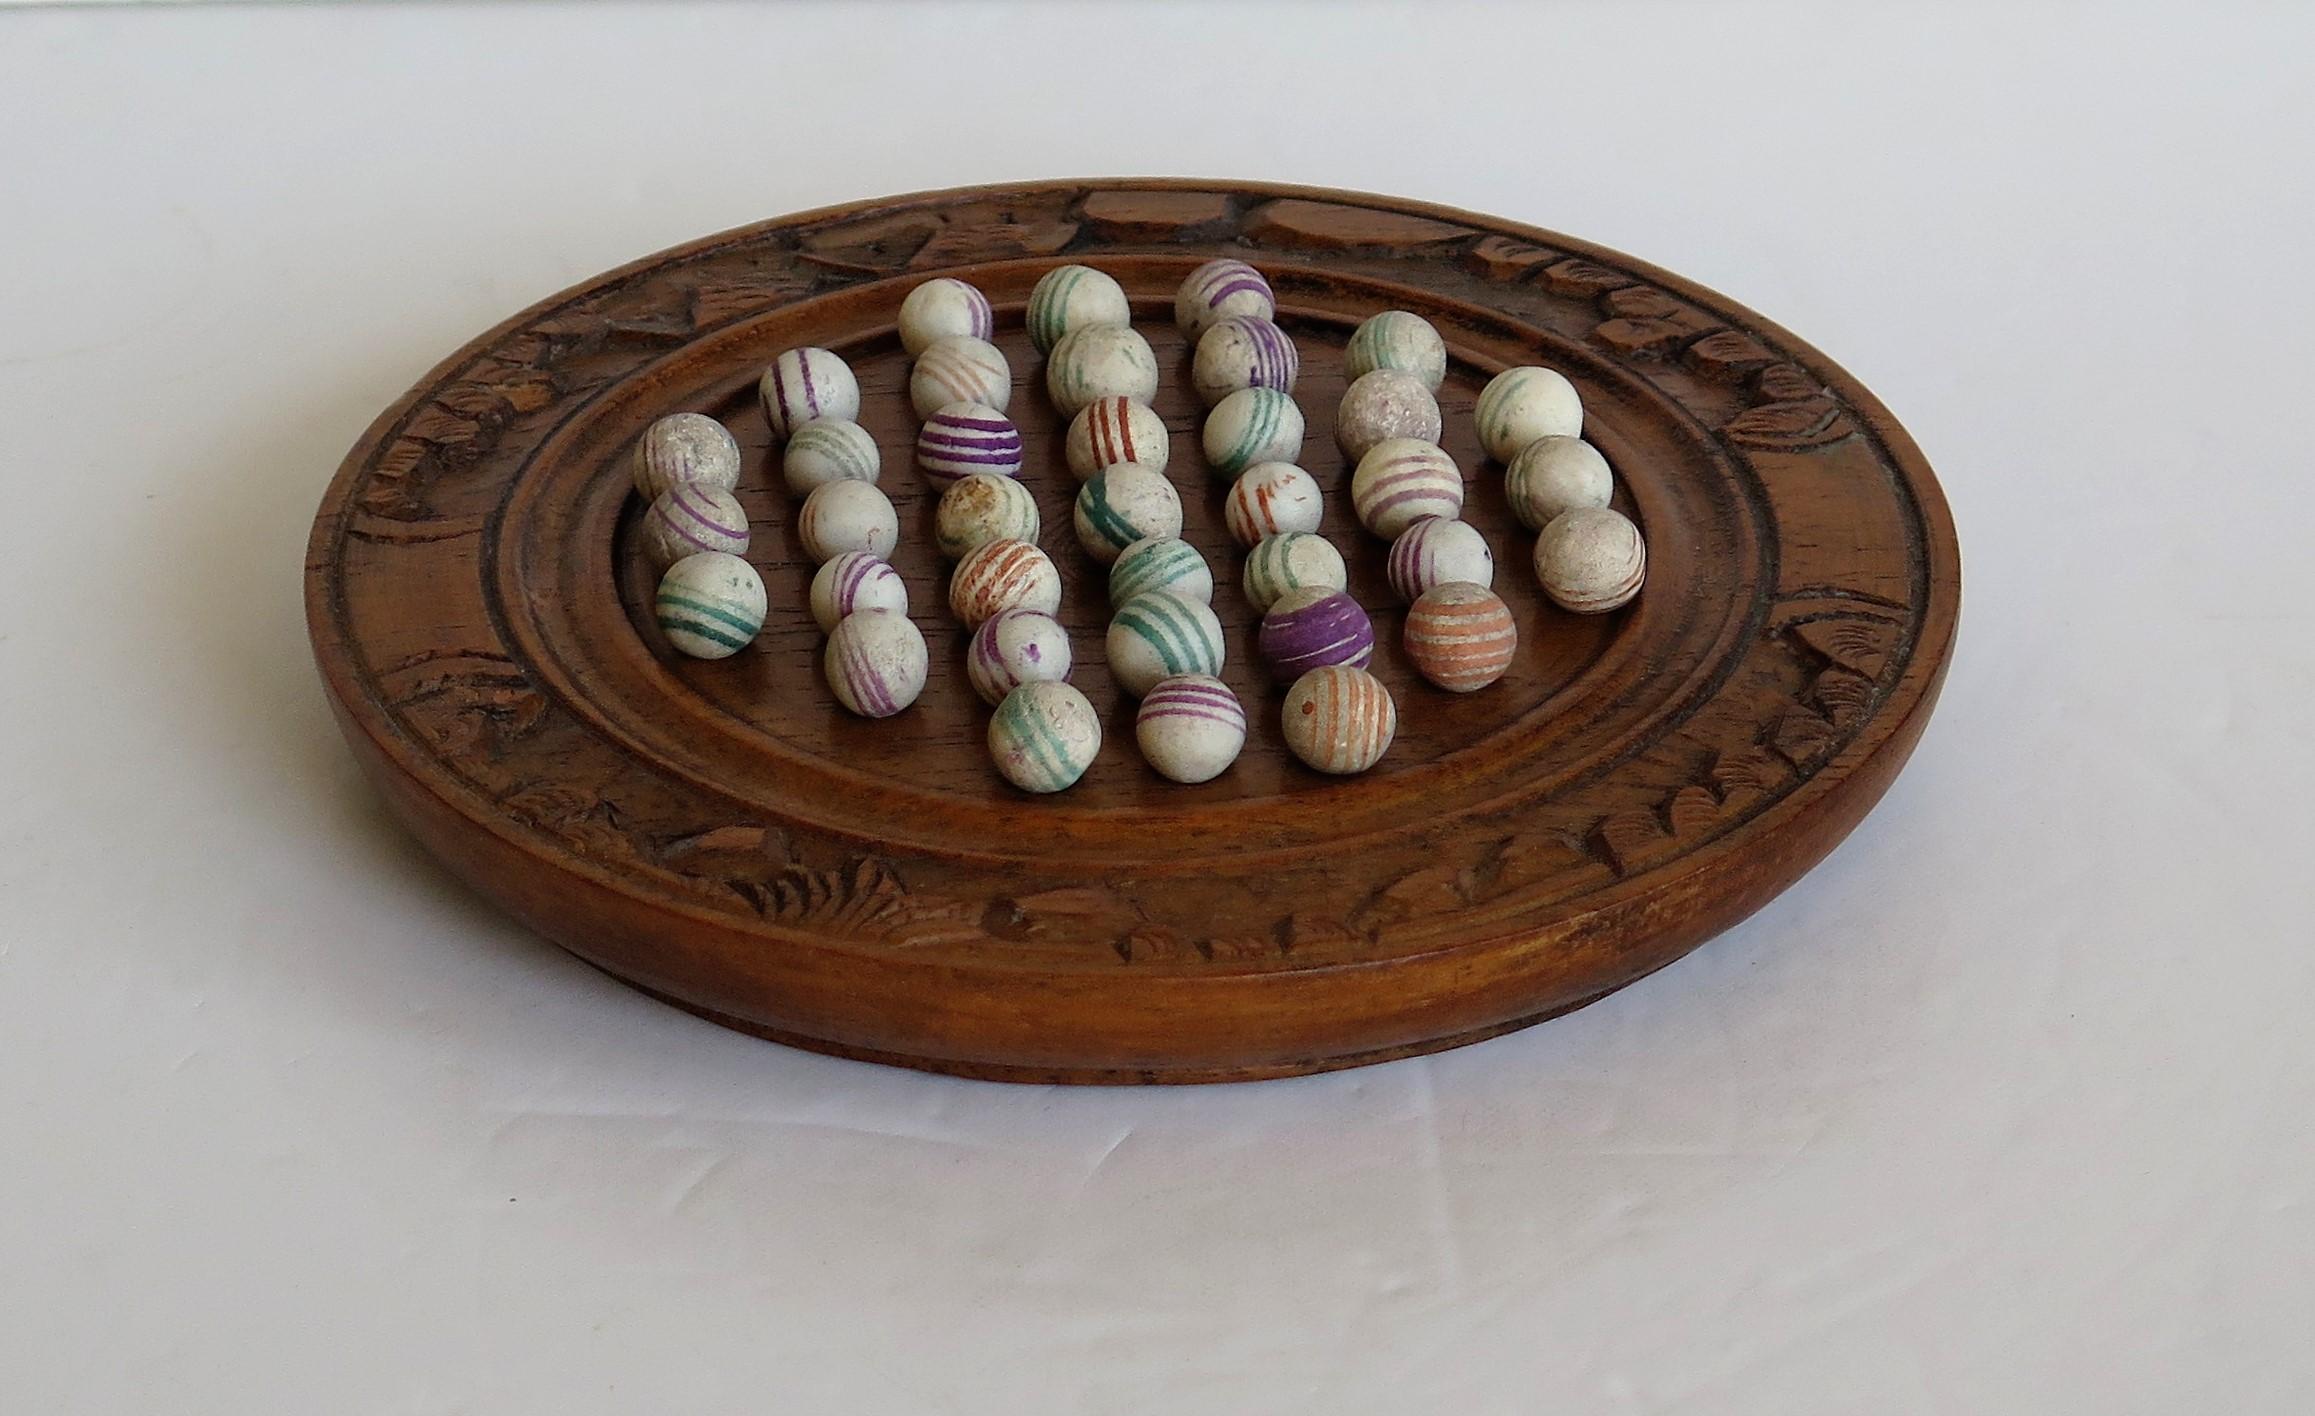 This is a complete board game of marble solitaire from the second half of the 19th century.

The small diameter 6.5 inch circular turned board is very attractive being made of a hardwood, possibly Walnut, with a gallery to the outer perimeter and